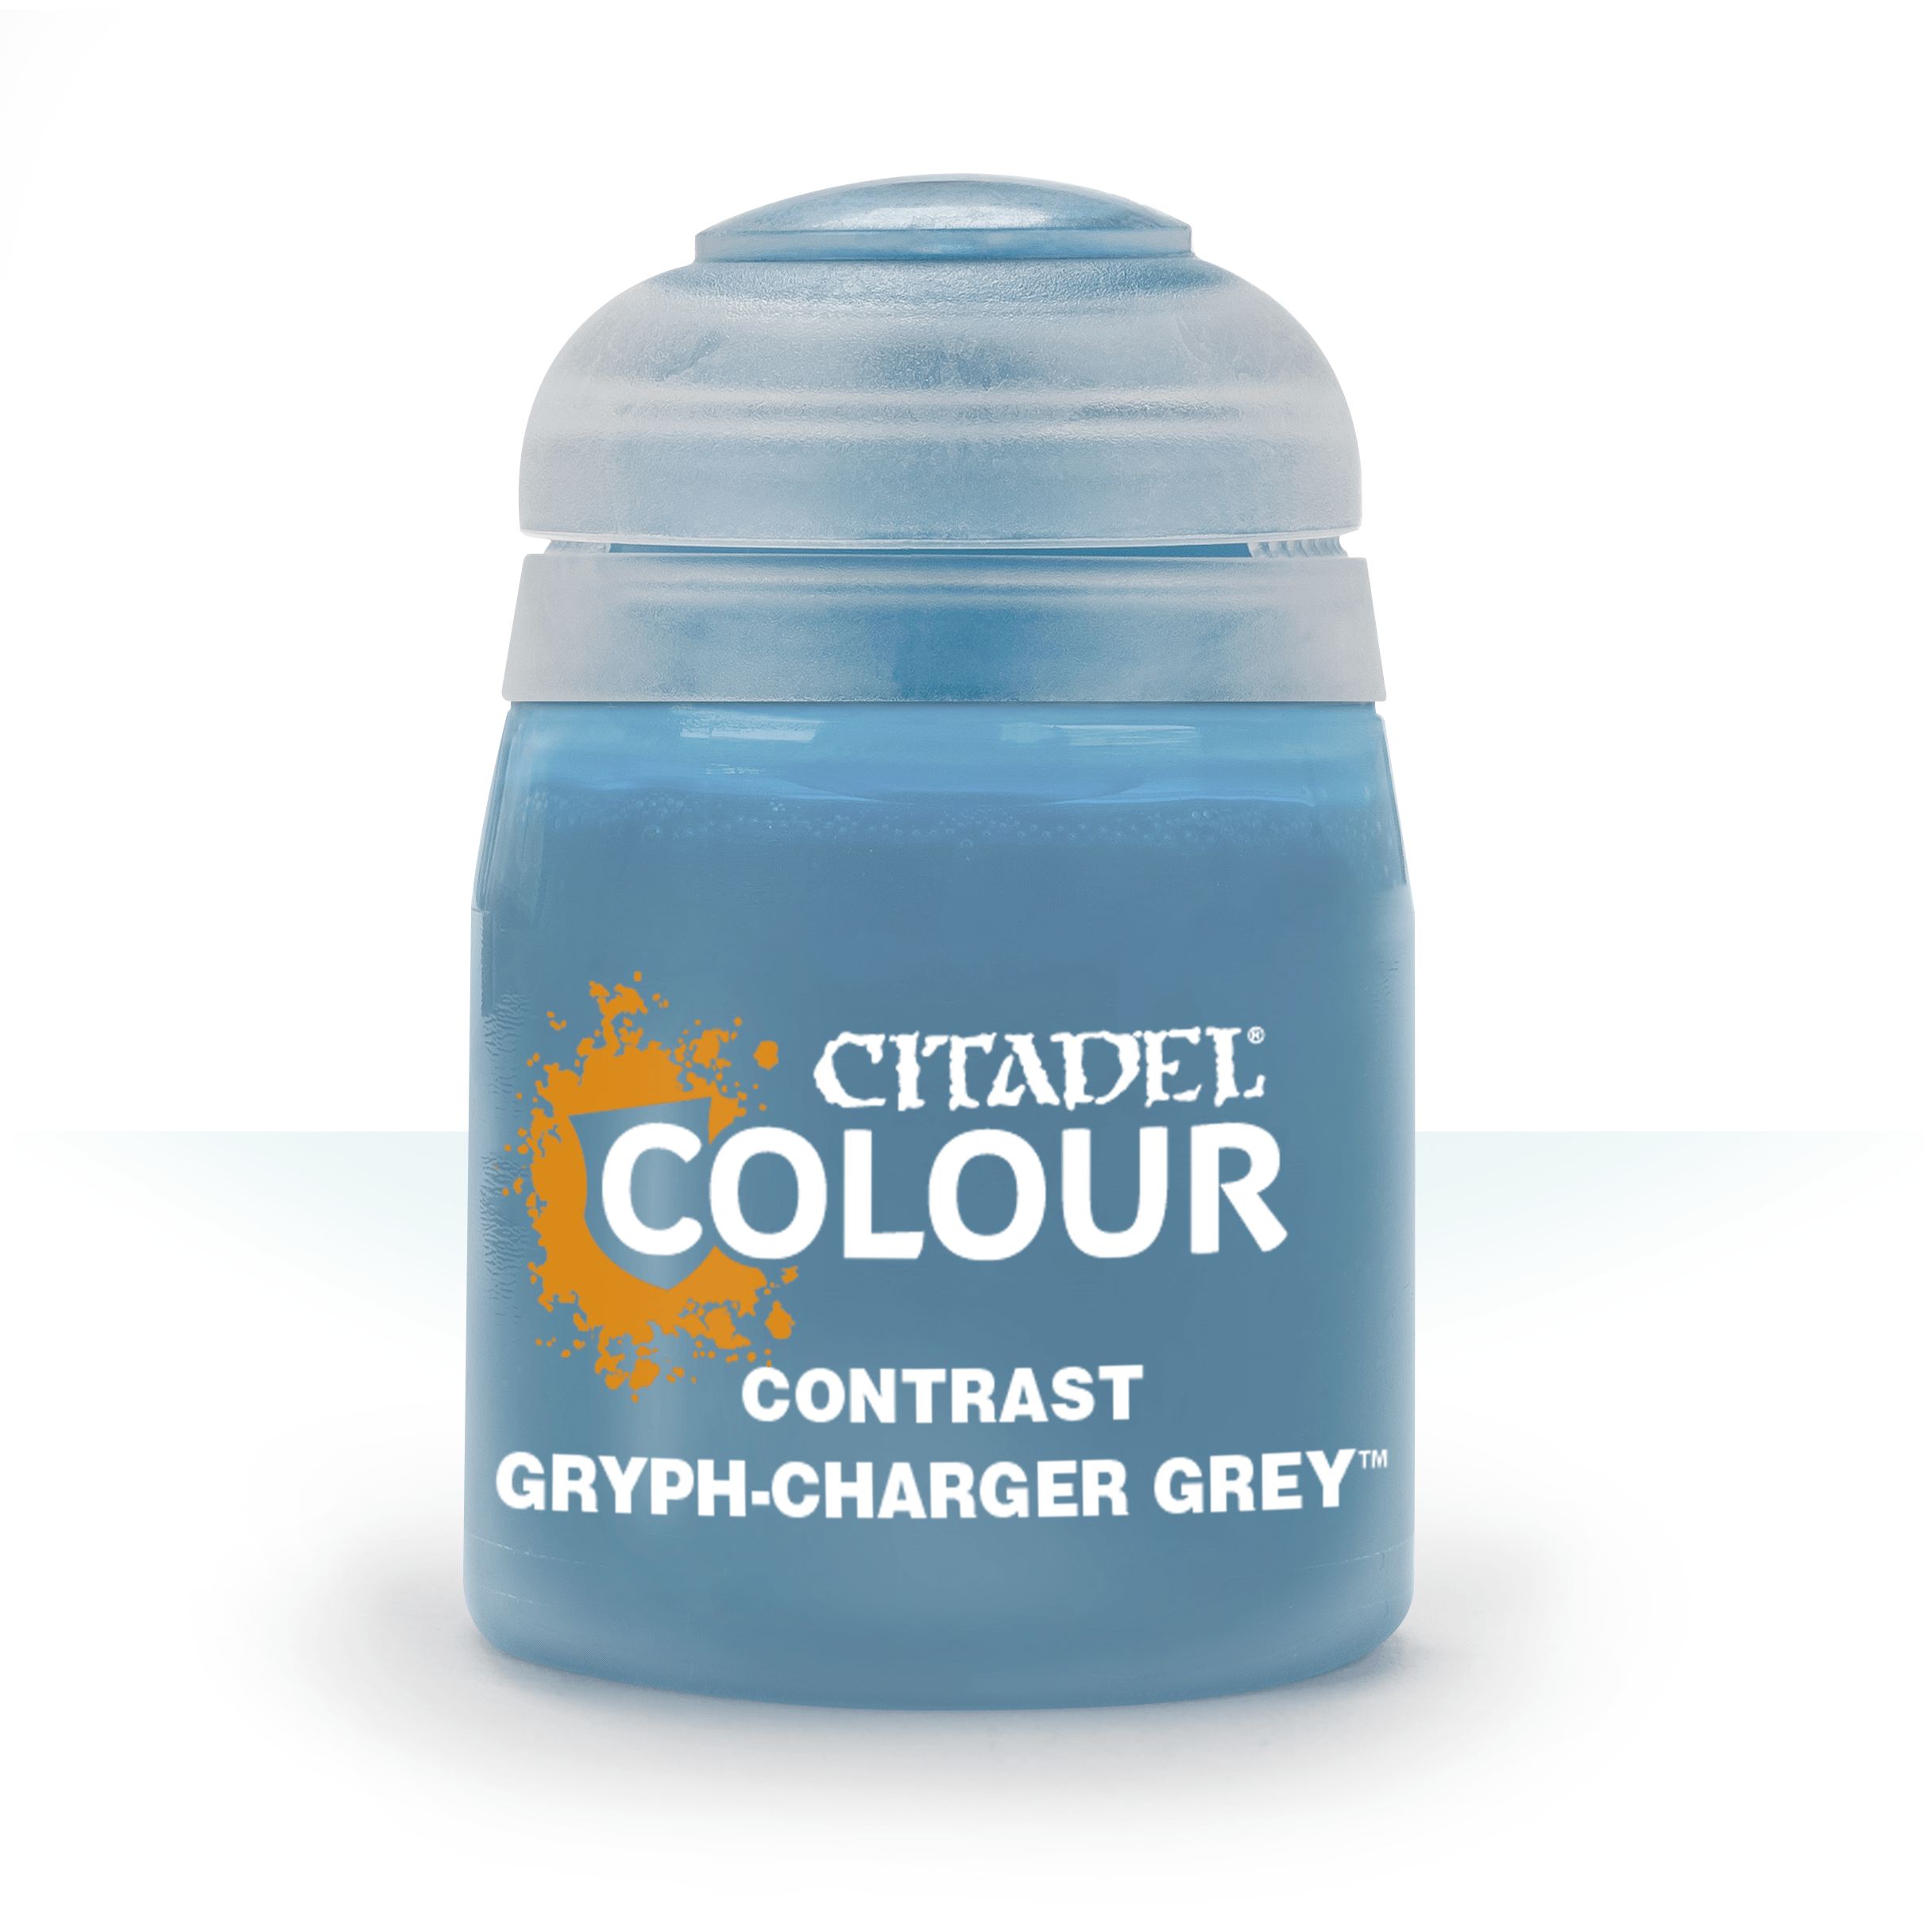 Contrast Gryph-Charger Grey - Citadel Colour